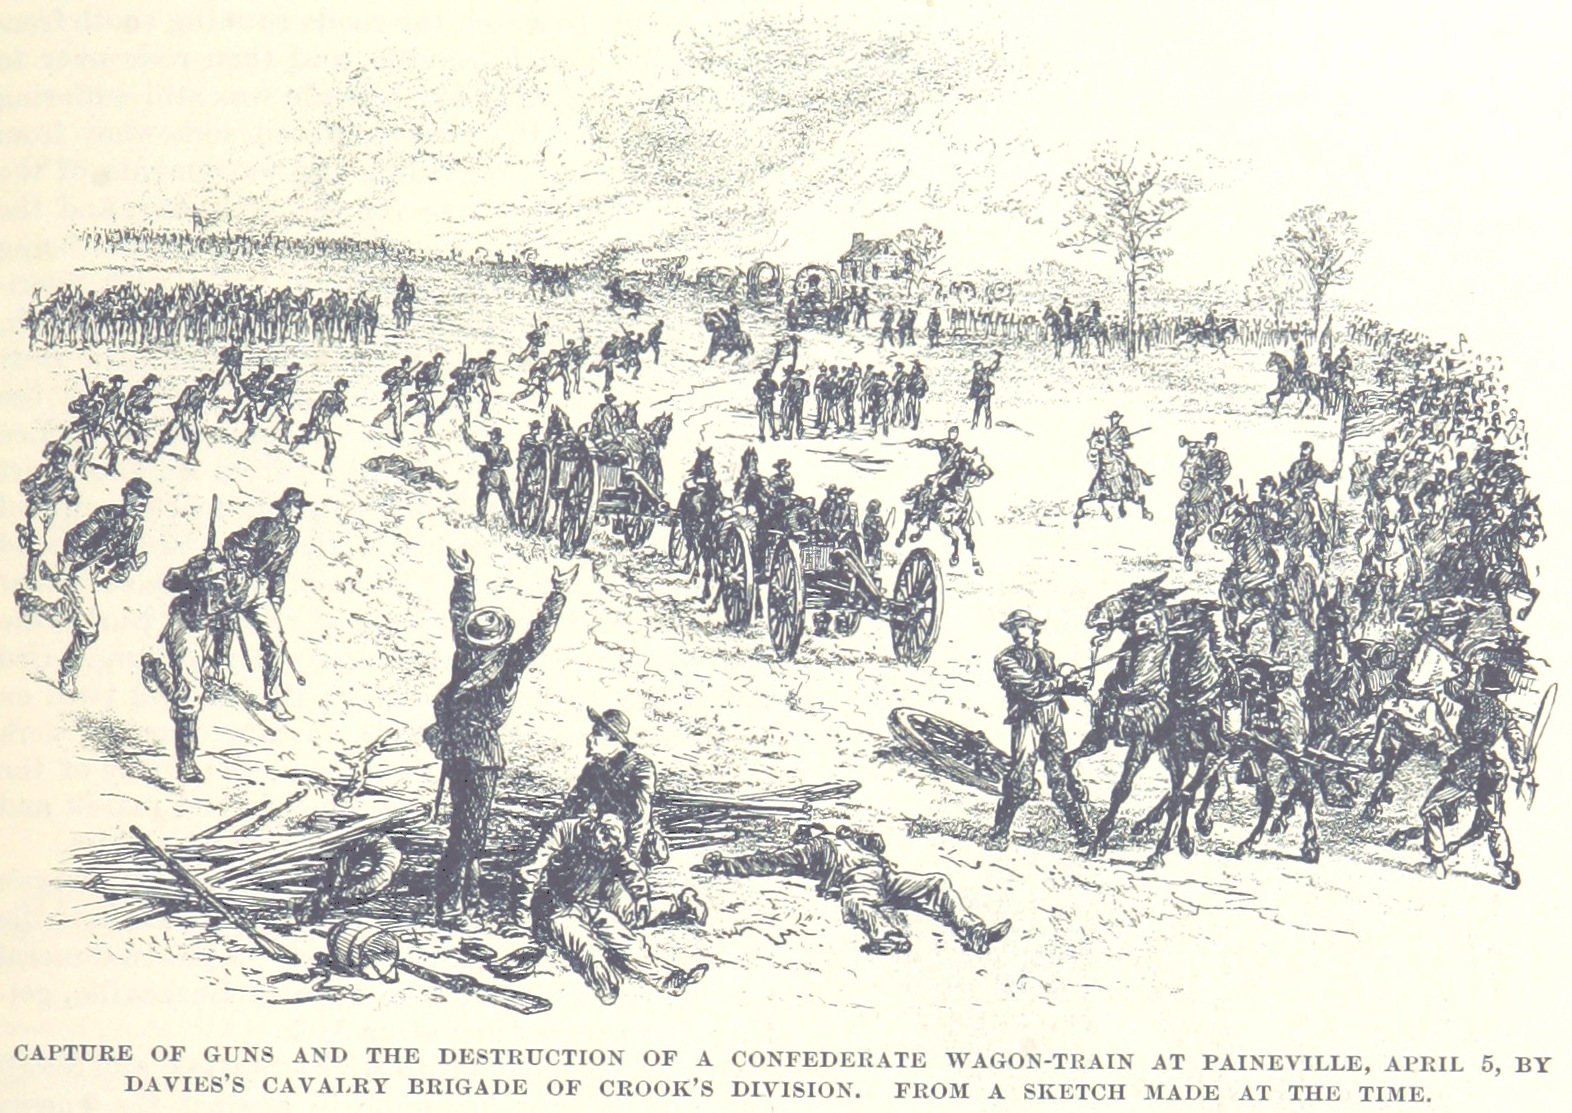 Union cavalry captures Confederate guns and burns a wagon train near Paineville, Virginia, on April 5, 1865.